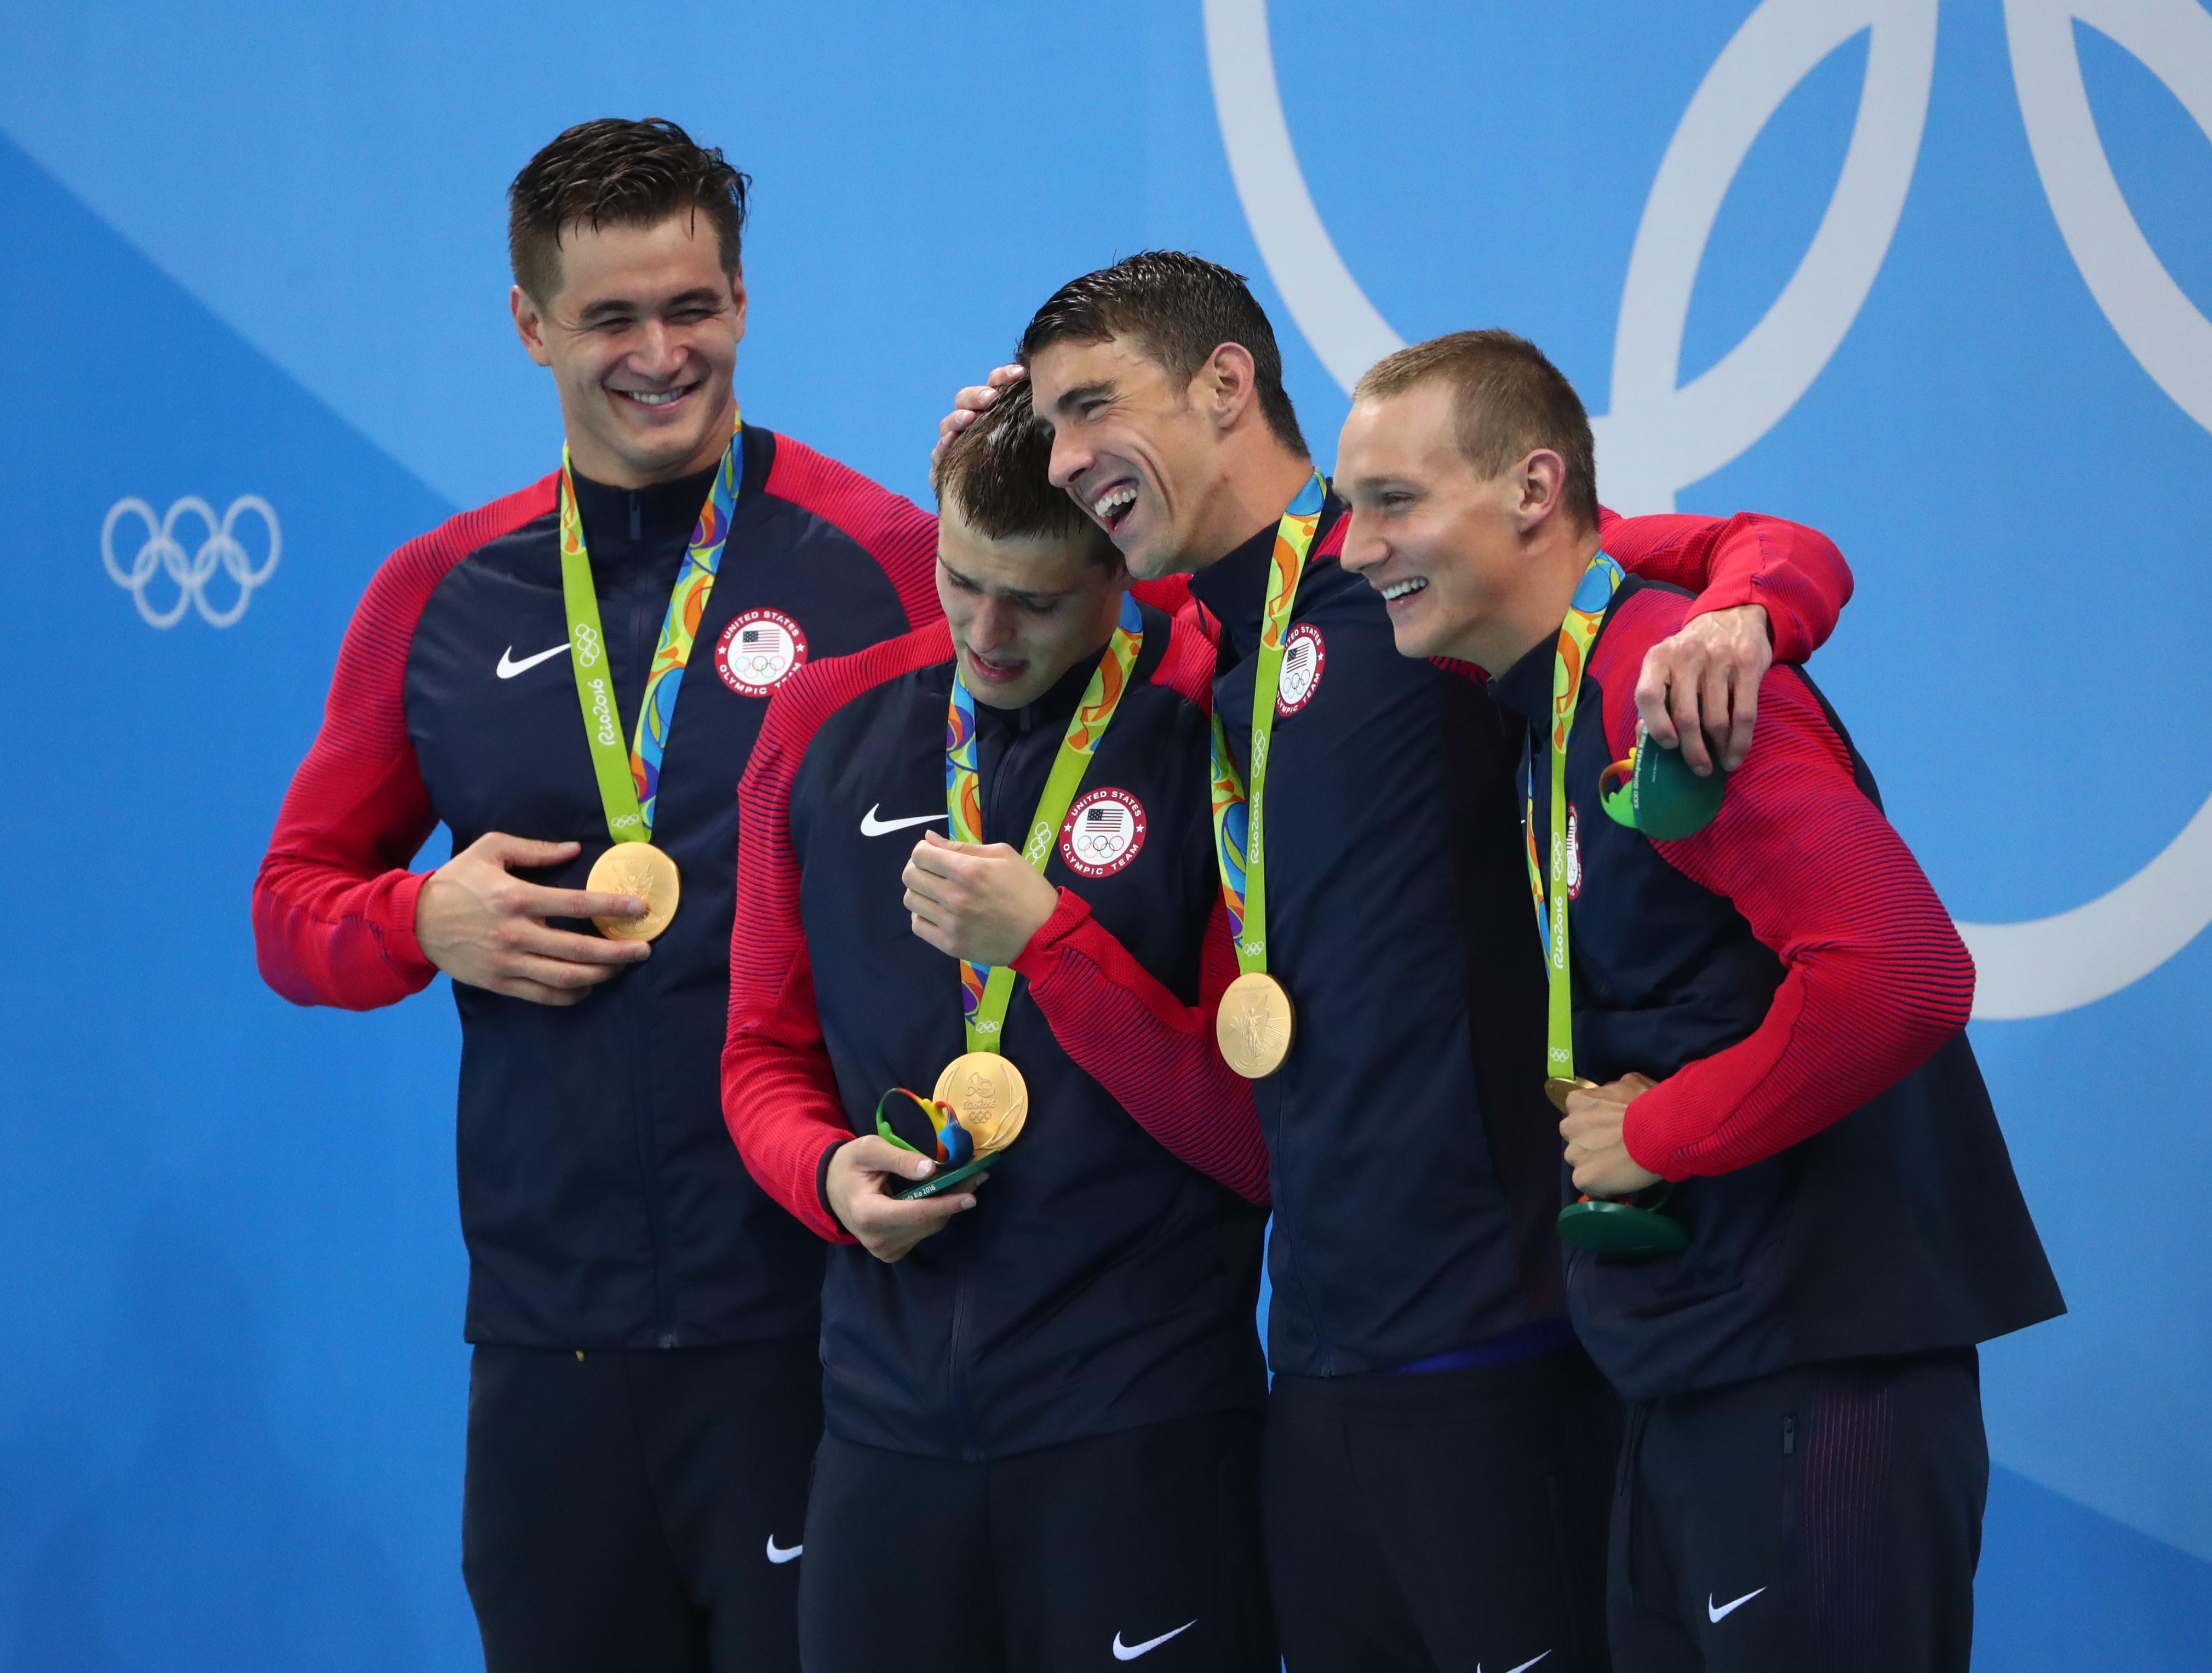 Nathan Adrian, Ryan Held, Michael Phelps and Caeleb Dressel celebrate with their gold medals after the men's 4x100m freestyle relay final in the Rio 2016 Summer Olympic Games at Olympic Aquatics Stadium on Aug. 7, 2016.